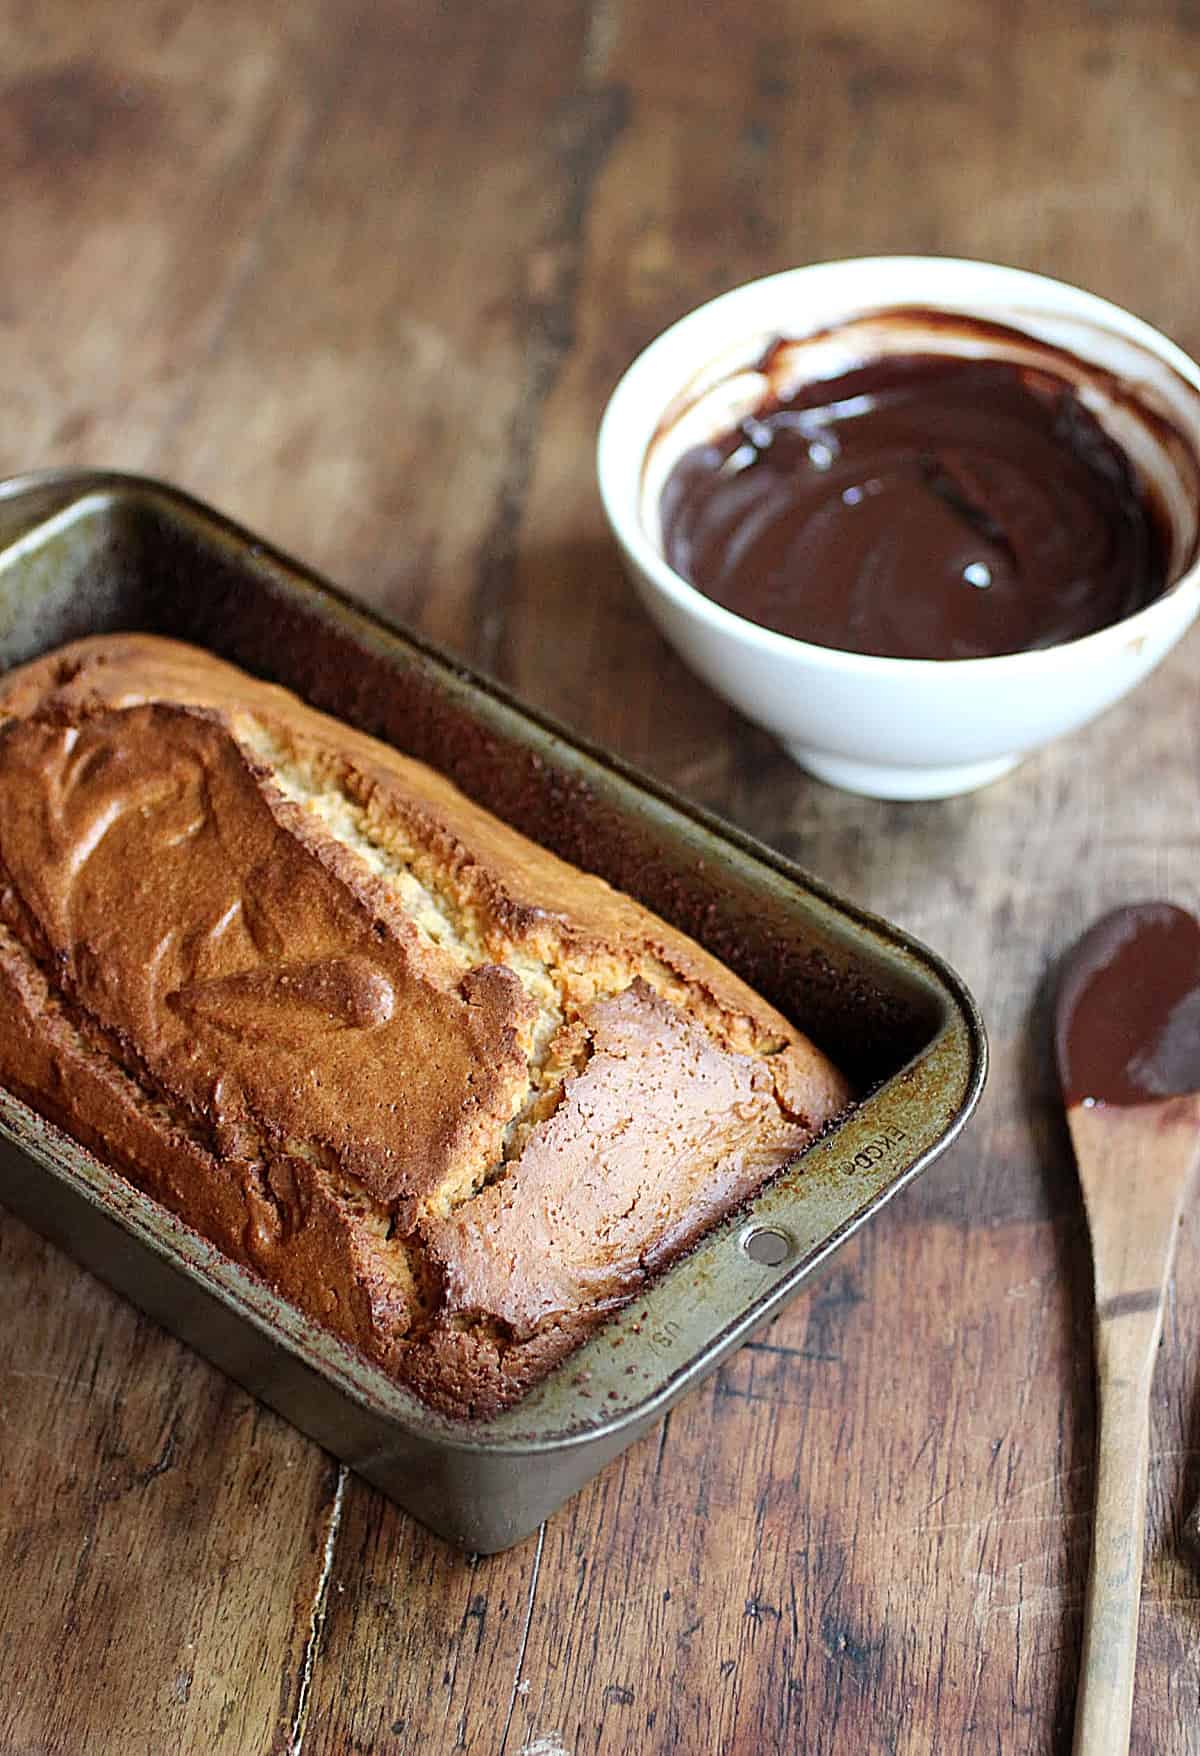 Loaf of quick bread in metal pan, bowl with chocolate sauce, wooden table